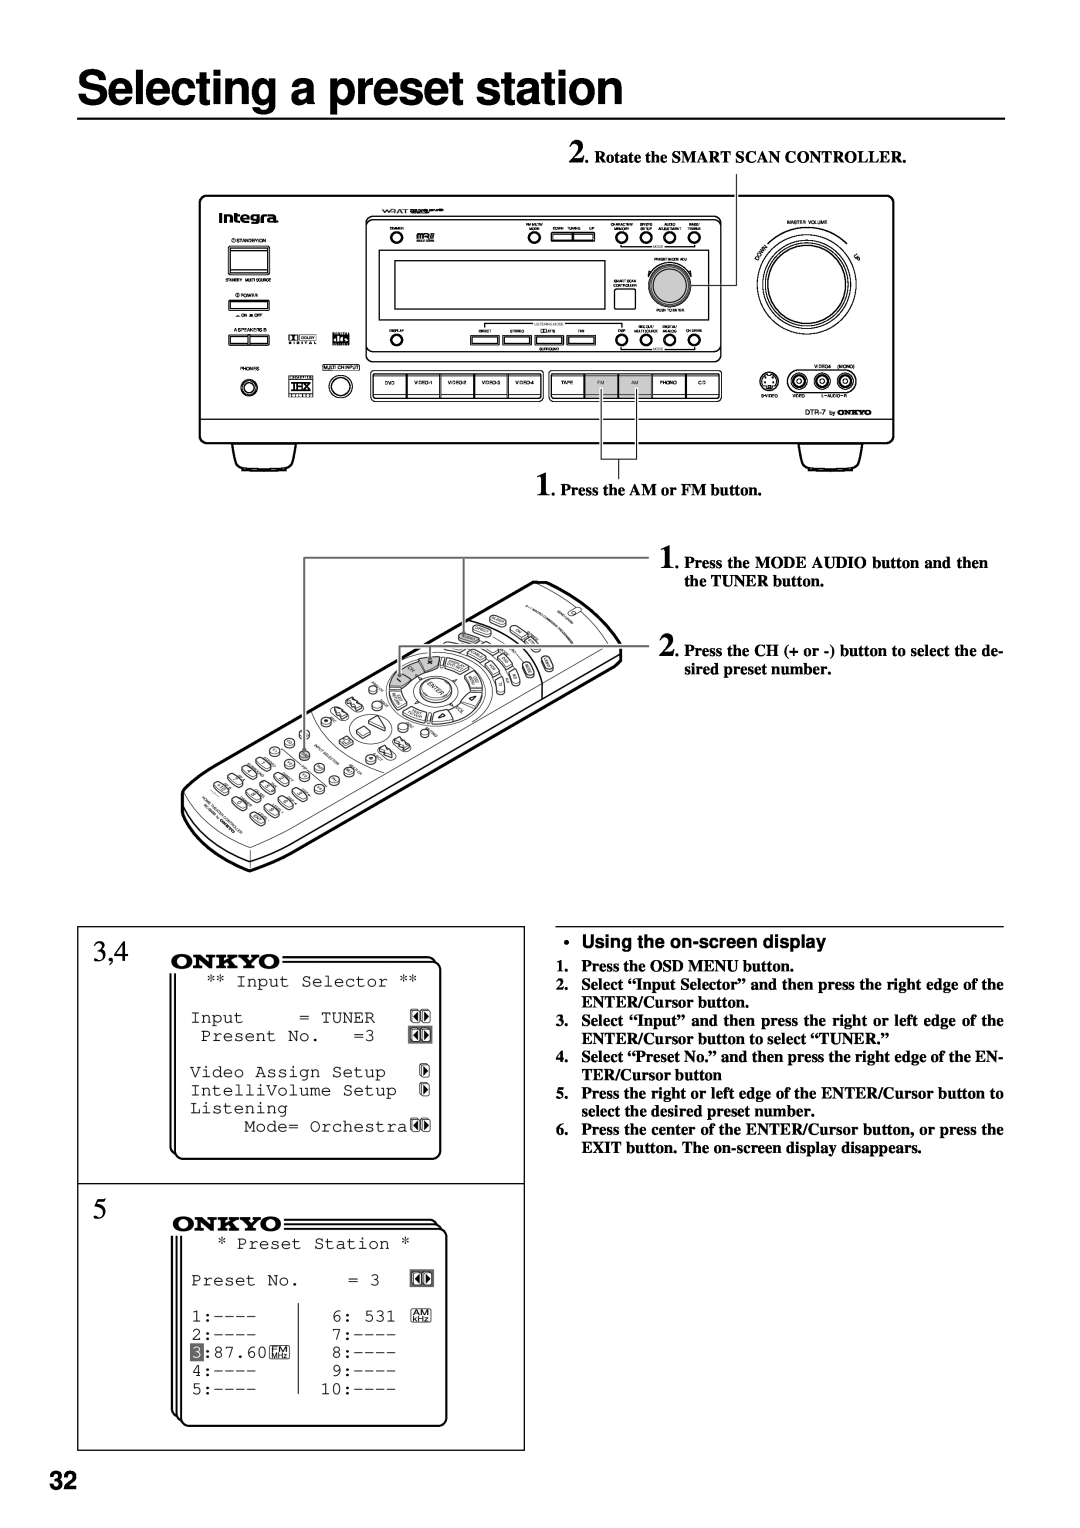 Integra DTR-7 instruction manual Selecting a preset station, Using the on-screendisplay 